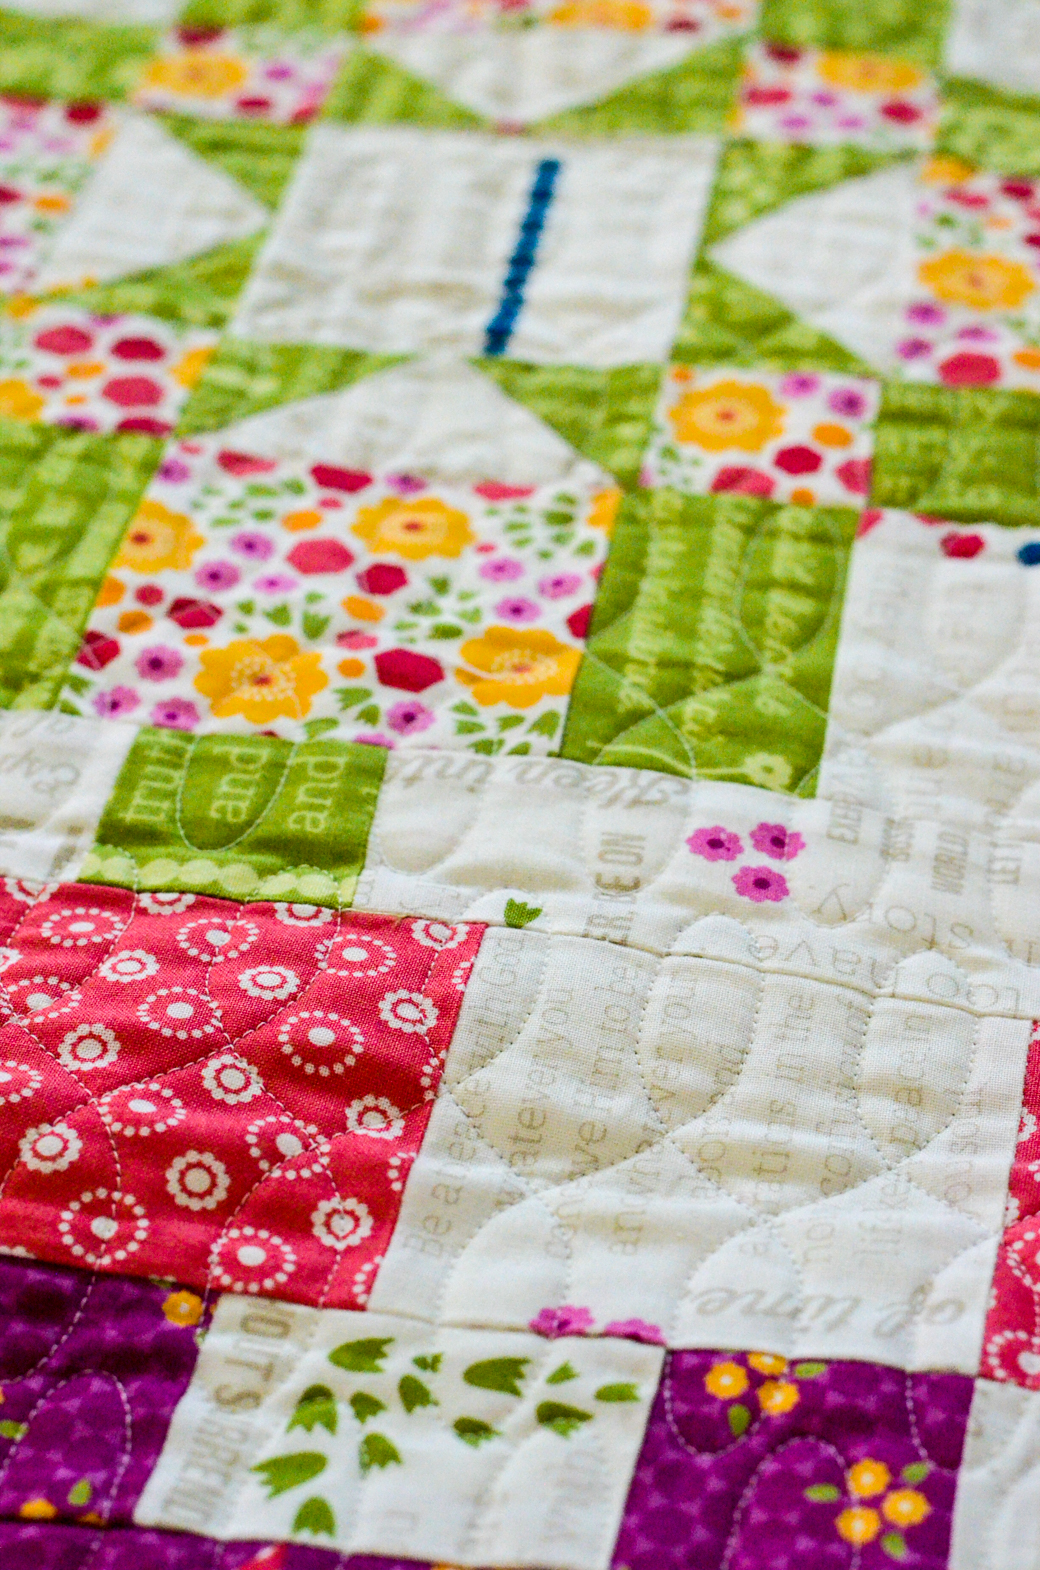 Solstice Quilt by April Rosenthal for Prairie Grass Patterns